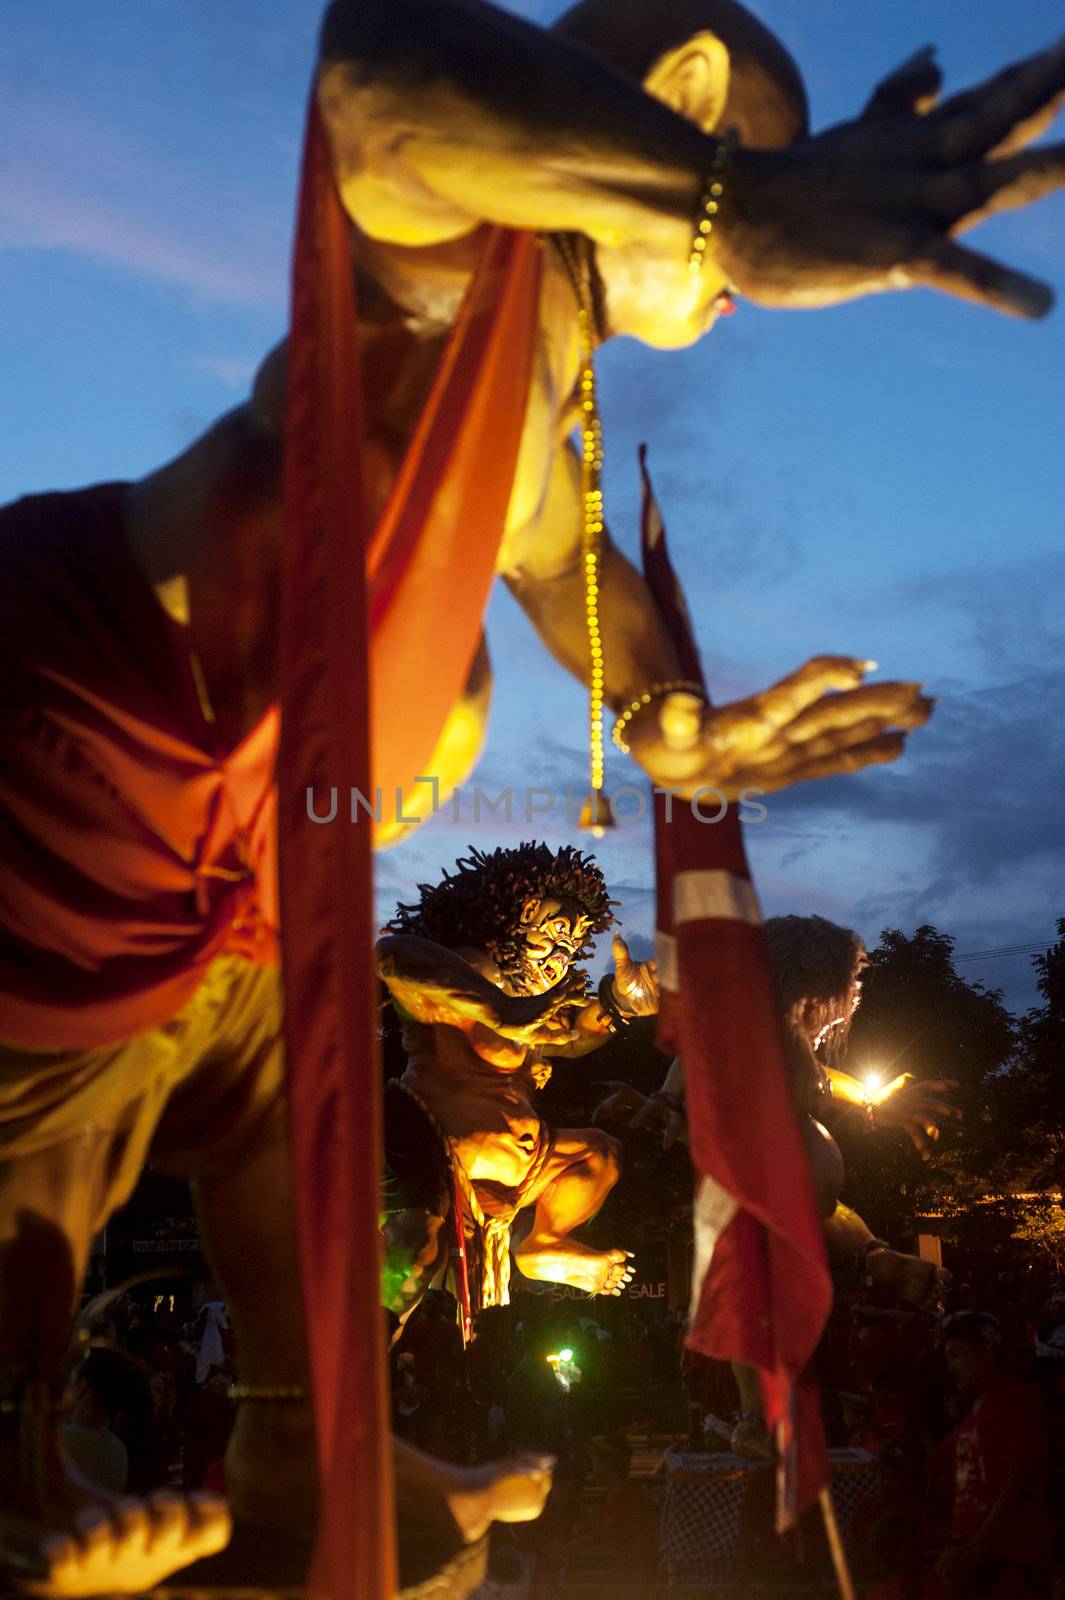 Ubud, Bali, Indonesia - March 12, 2013: Balinese statue Ogoh-Ogoh during the celebration of Nyepi - Balinese Day of Silence. The day following Nyepi is also celebrated as New year.